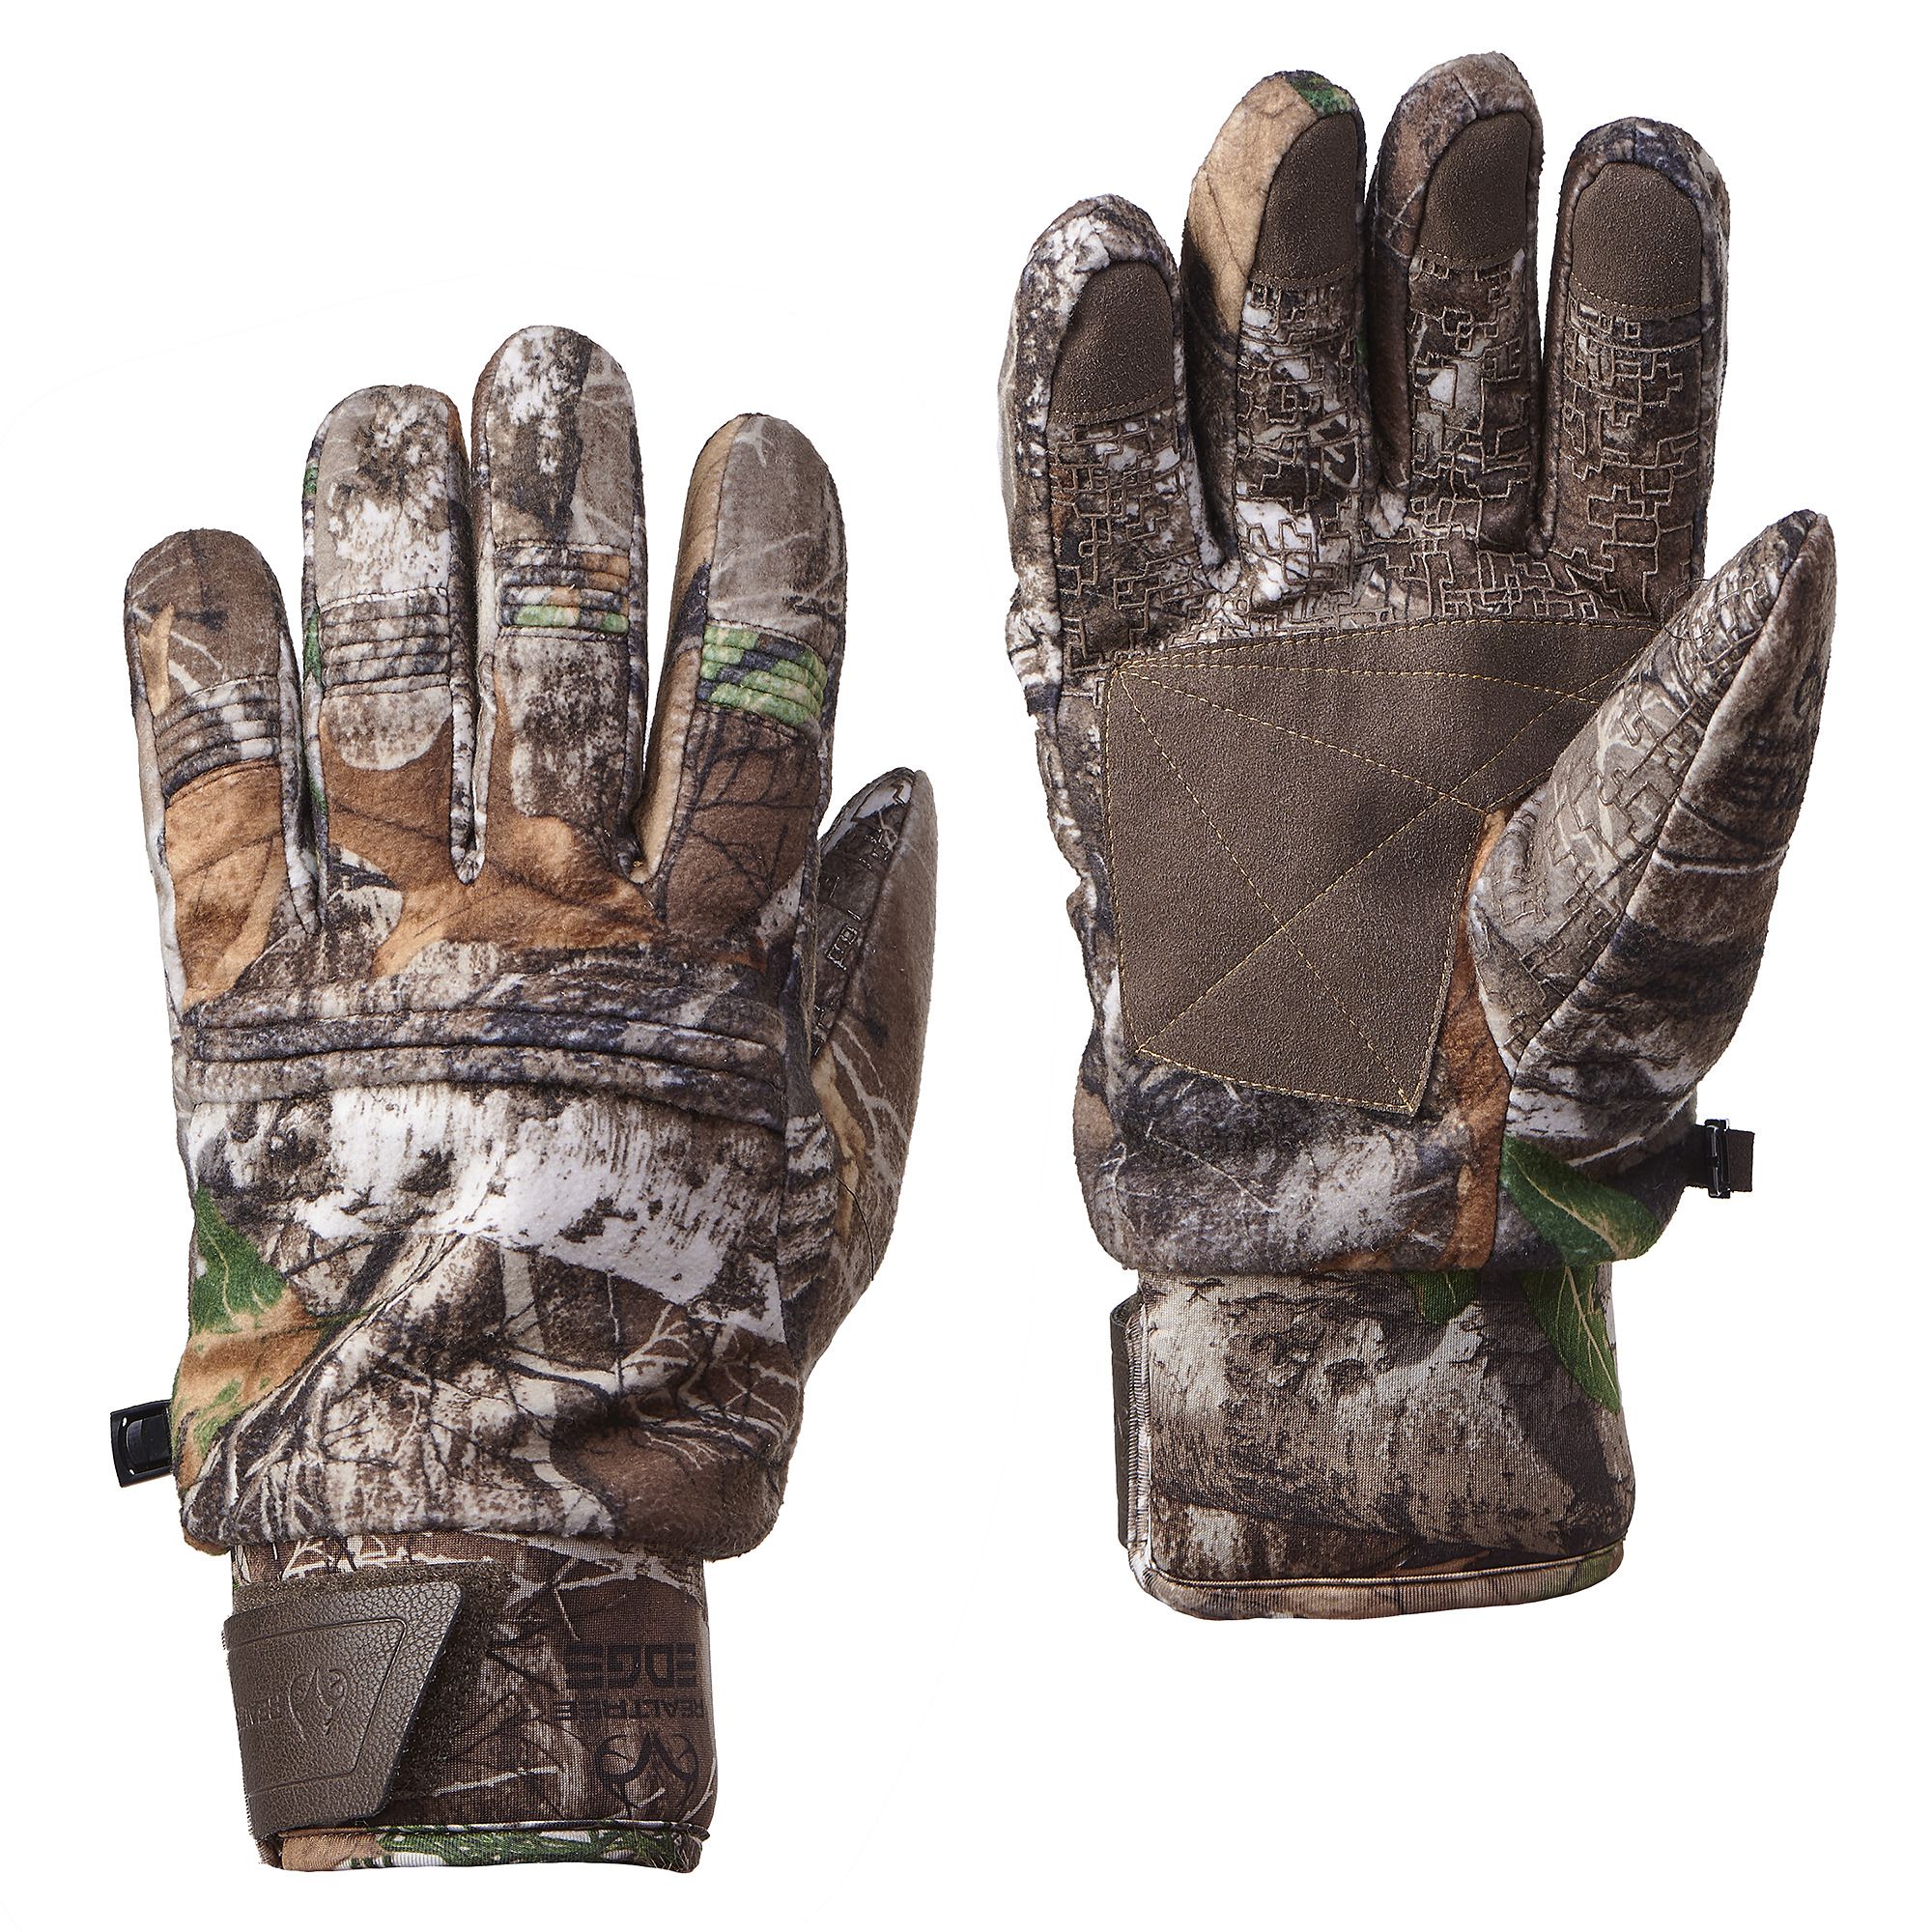 Realtree Edge Men’s Heavy Weight Gloves -$6.67(60% Off)